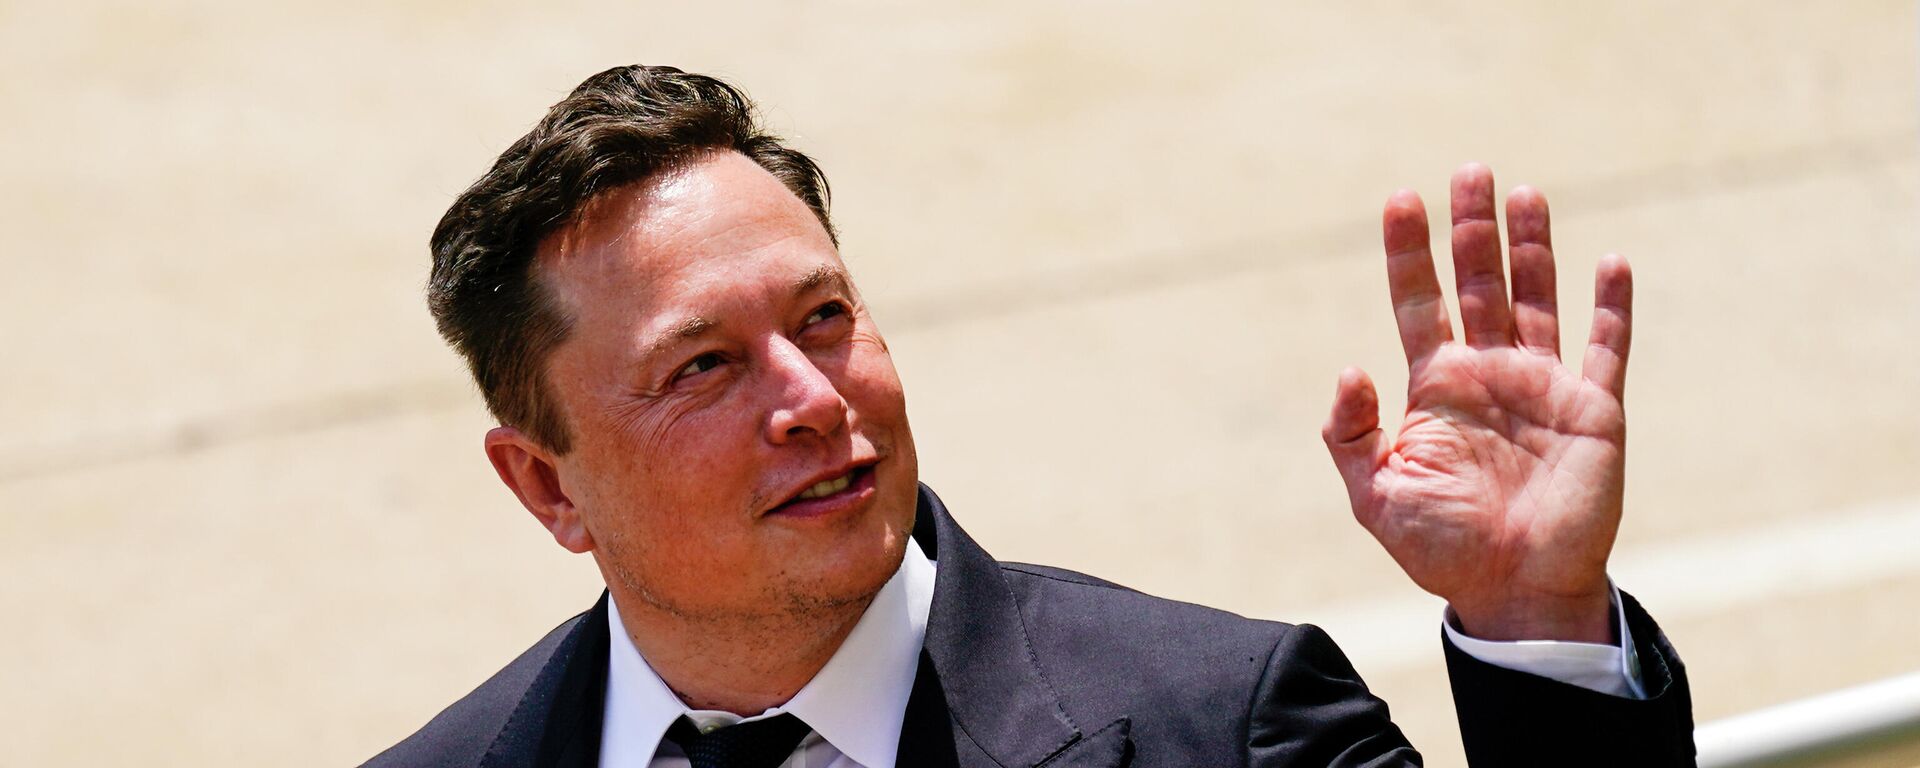 CEO Elon Musk departs from the justice center in Wilmington, Del., Tuesday, July 13, 2021. - Sputnik International, 1920, 27.01.2022